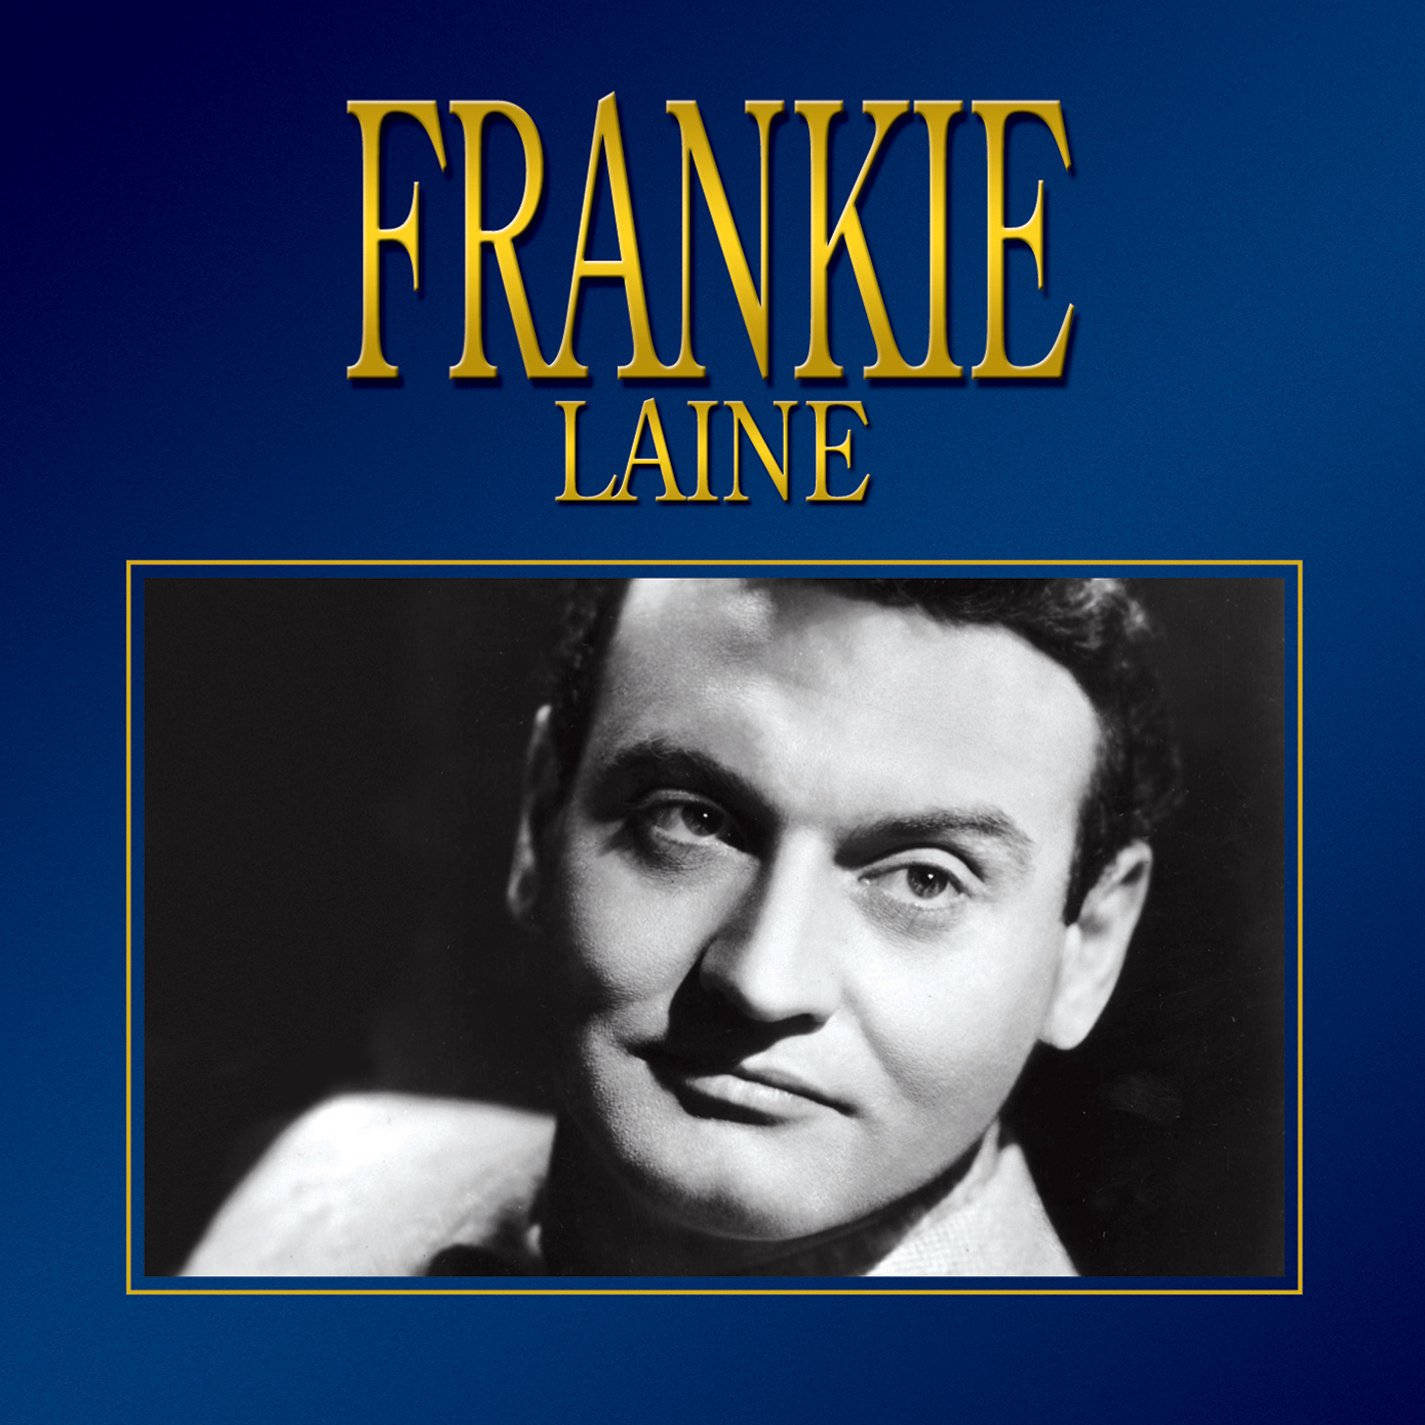 Frankie Laine Singer Songwriter And Actor Wallpaper